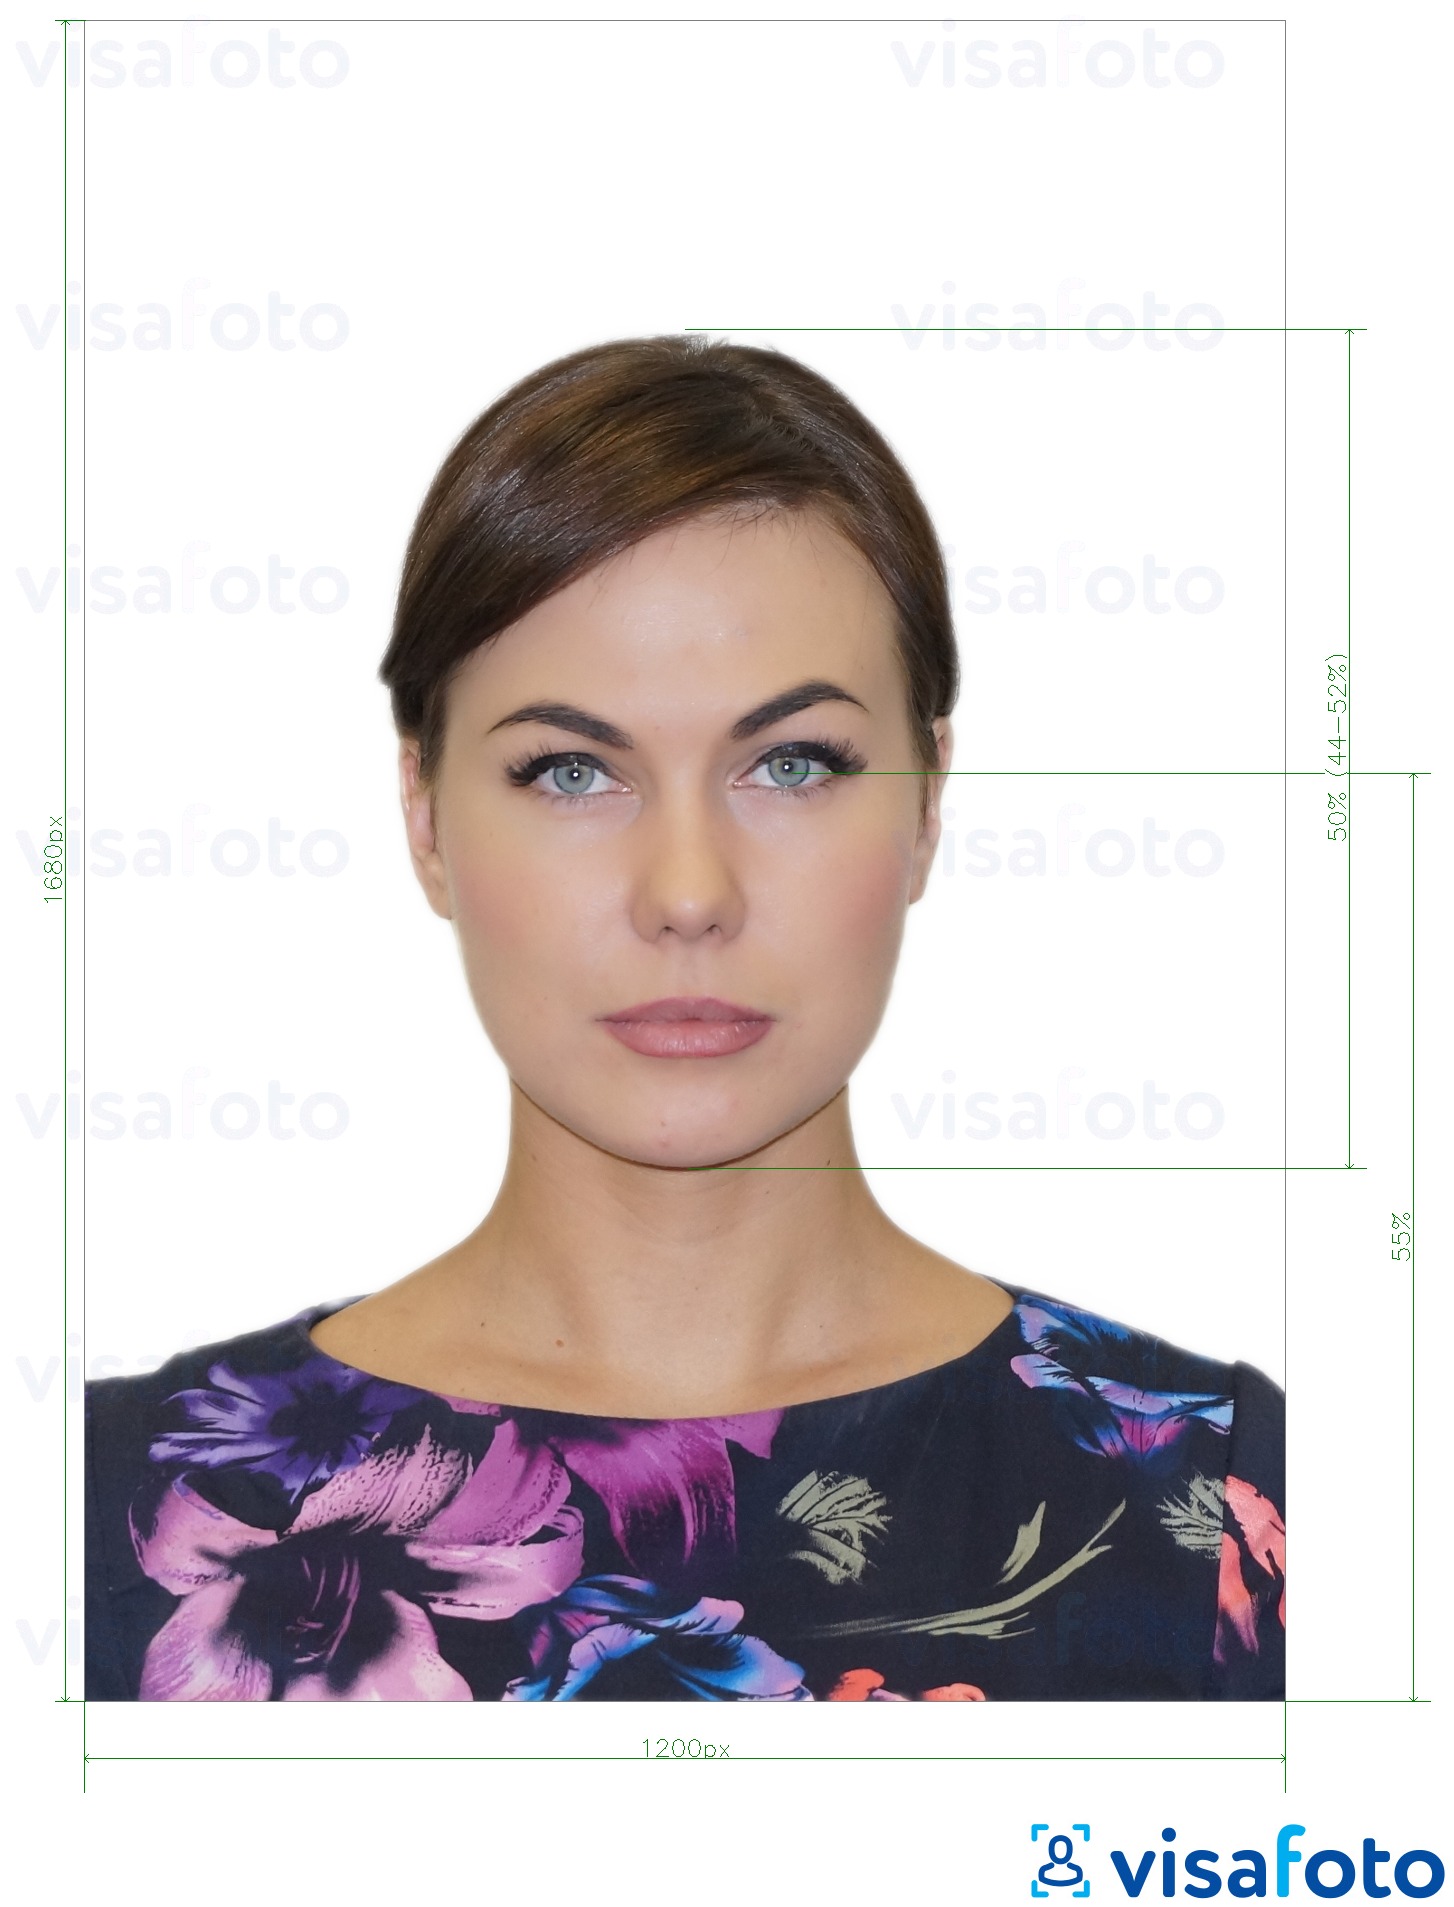 Example of photo for Canada Permanent Resident card 1200х1680 pixels with exact size specification